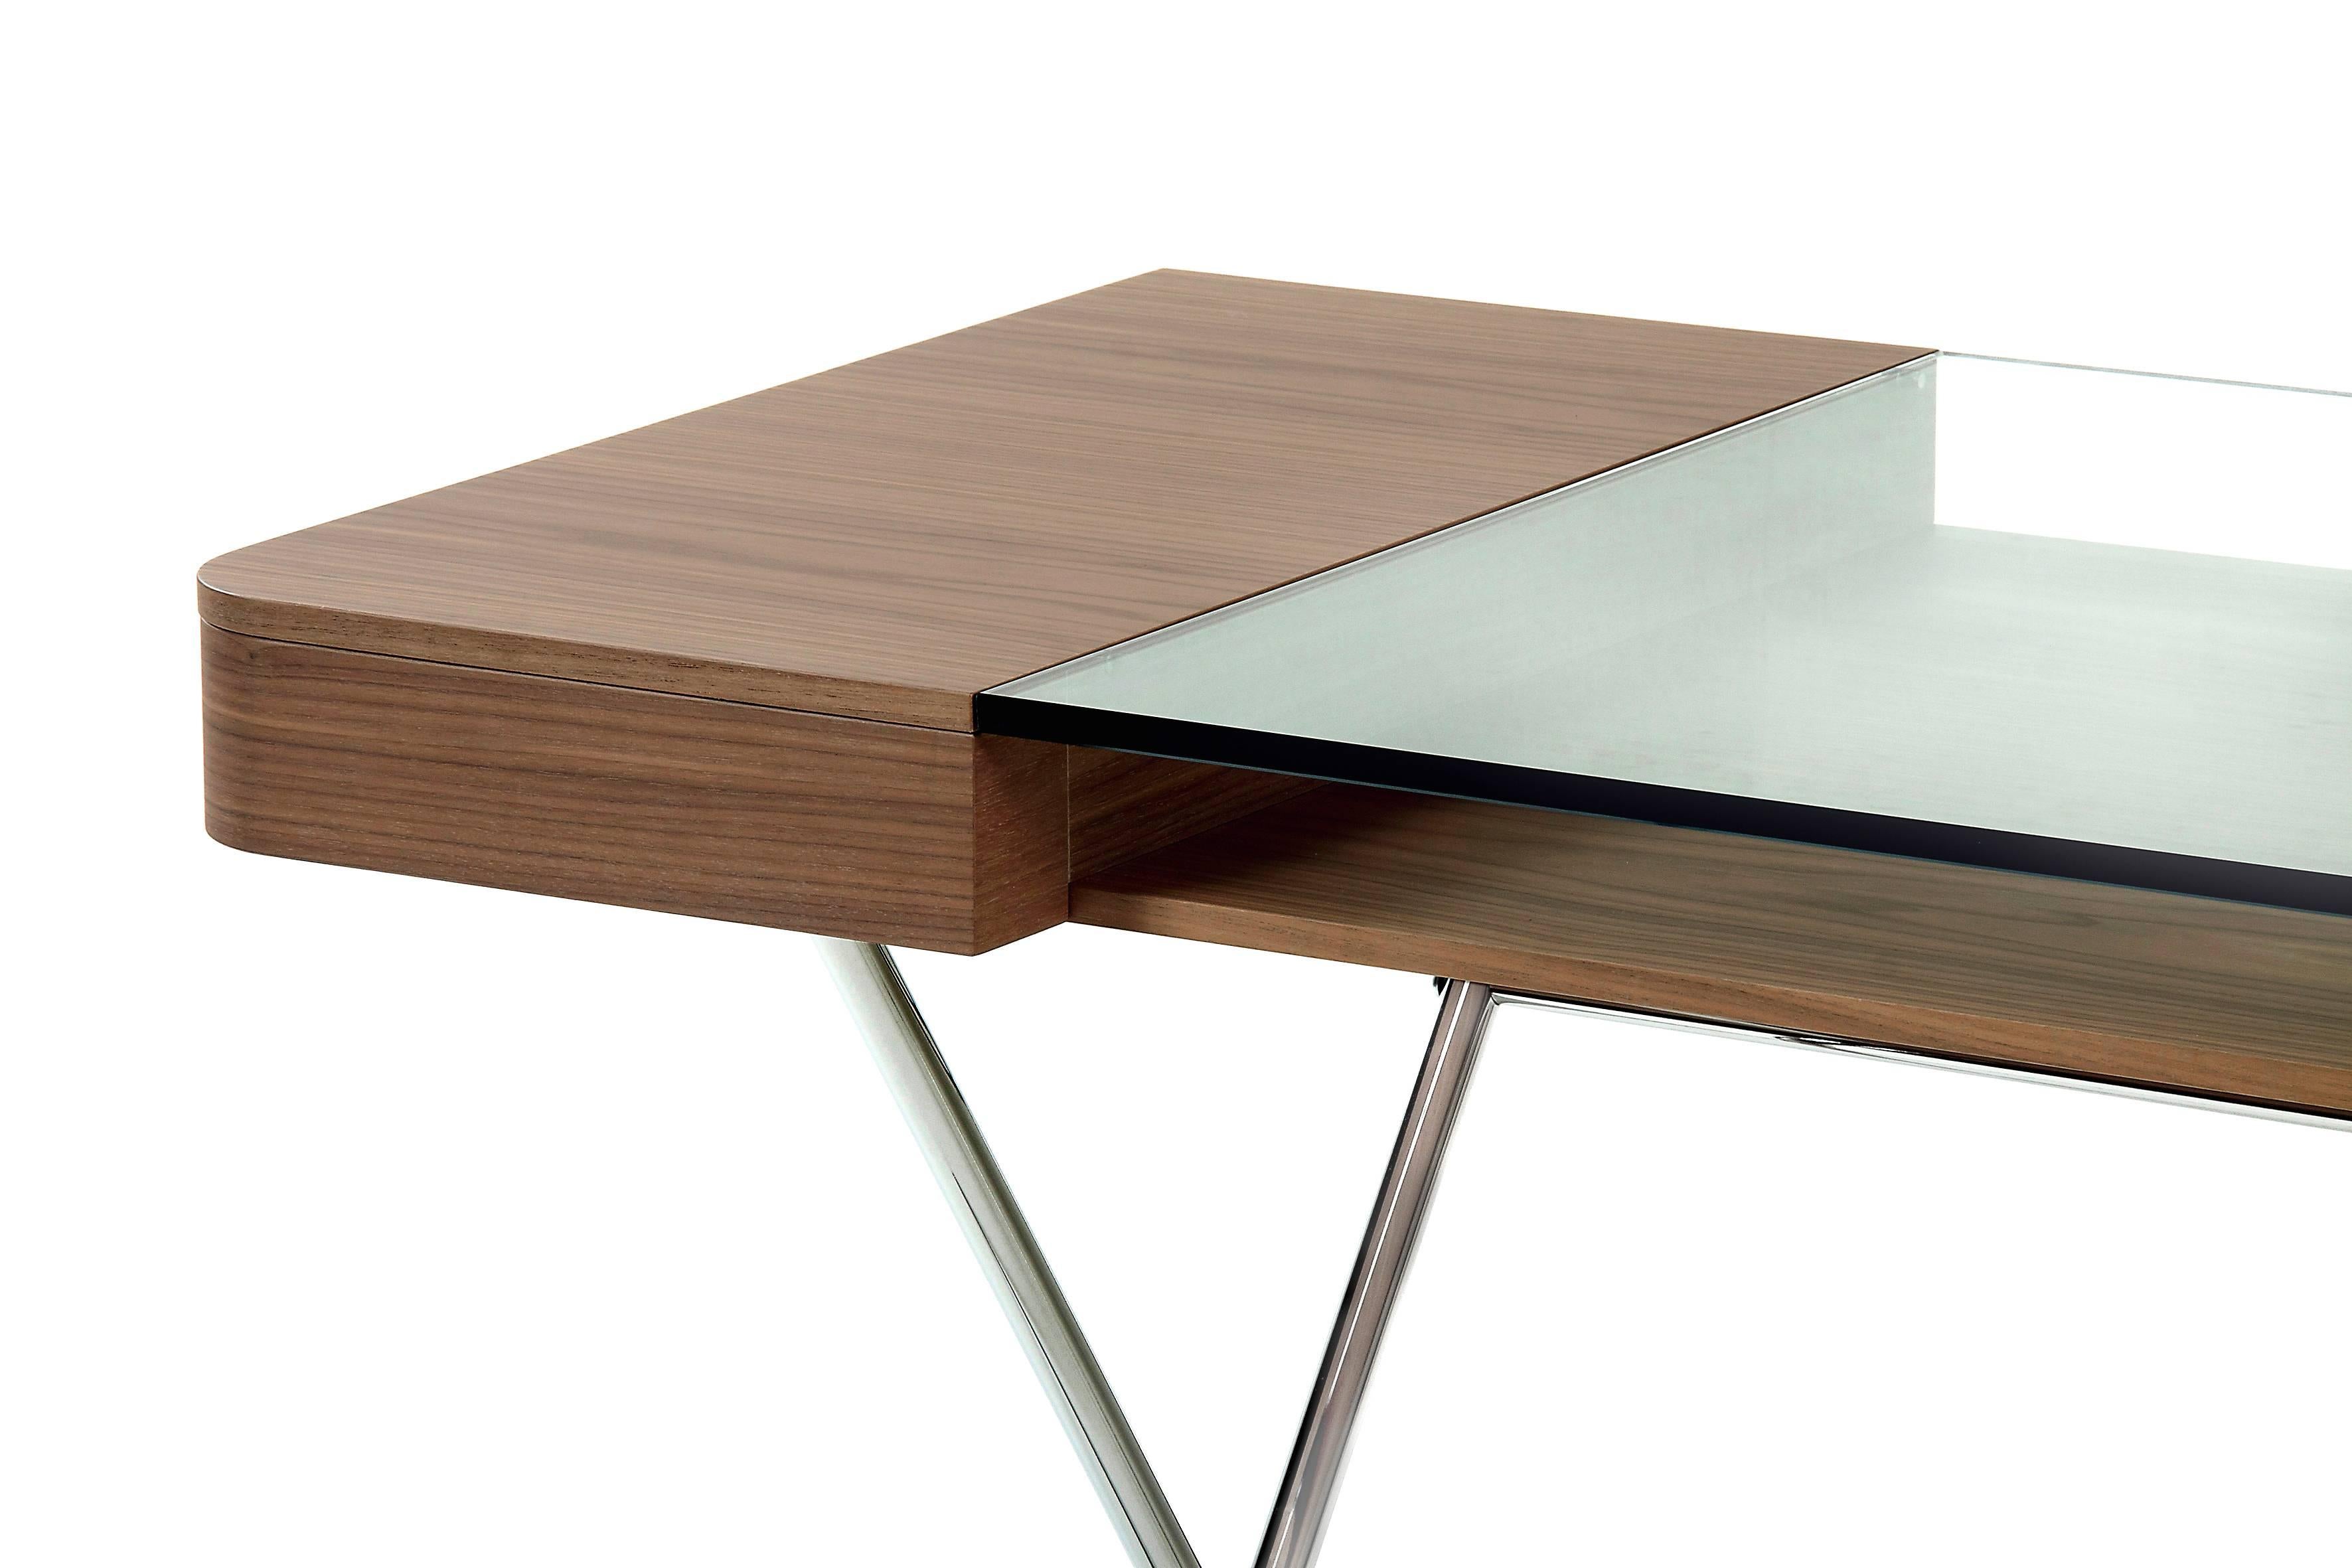 French Contemporary Cosimo Desk by Marco Zanuso Jr. with Walnut Veneer and Glass Top For Sale